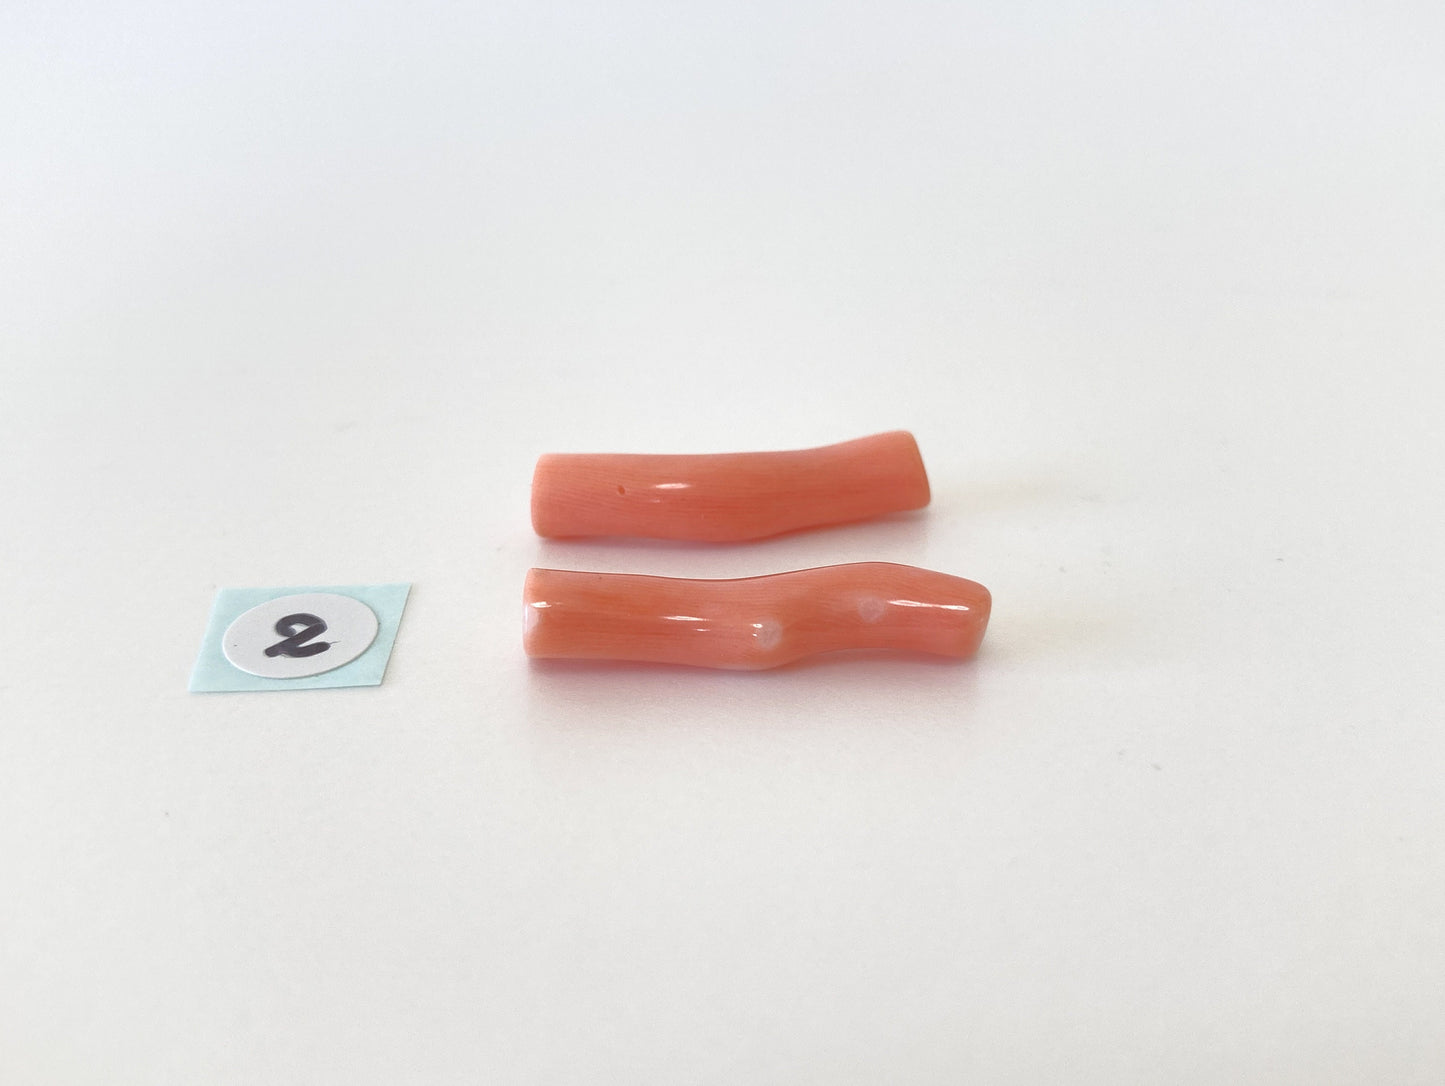 Natural Japanese Momo Coral, Orange/Pink Color, Hole on Top, Genuine Precious Coral, For Jewelry Making, Price per Pair